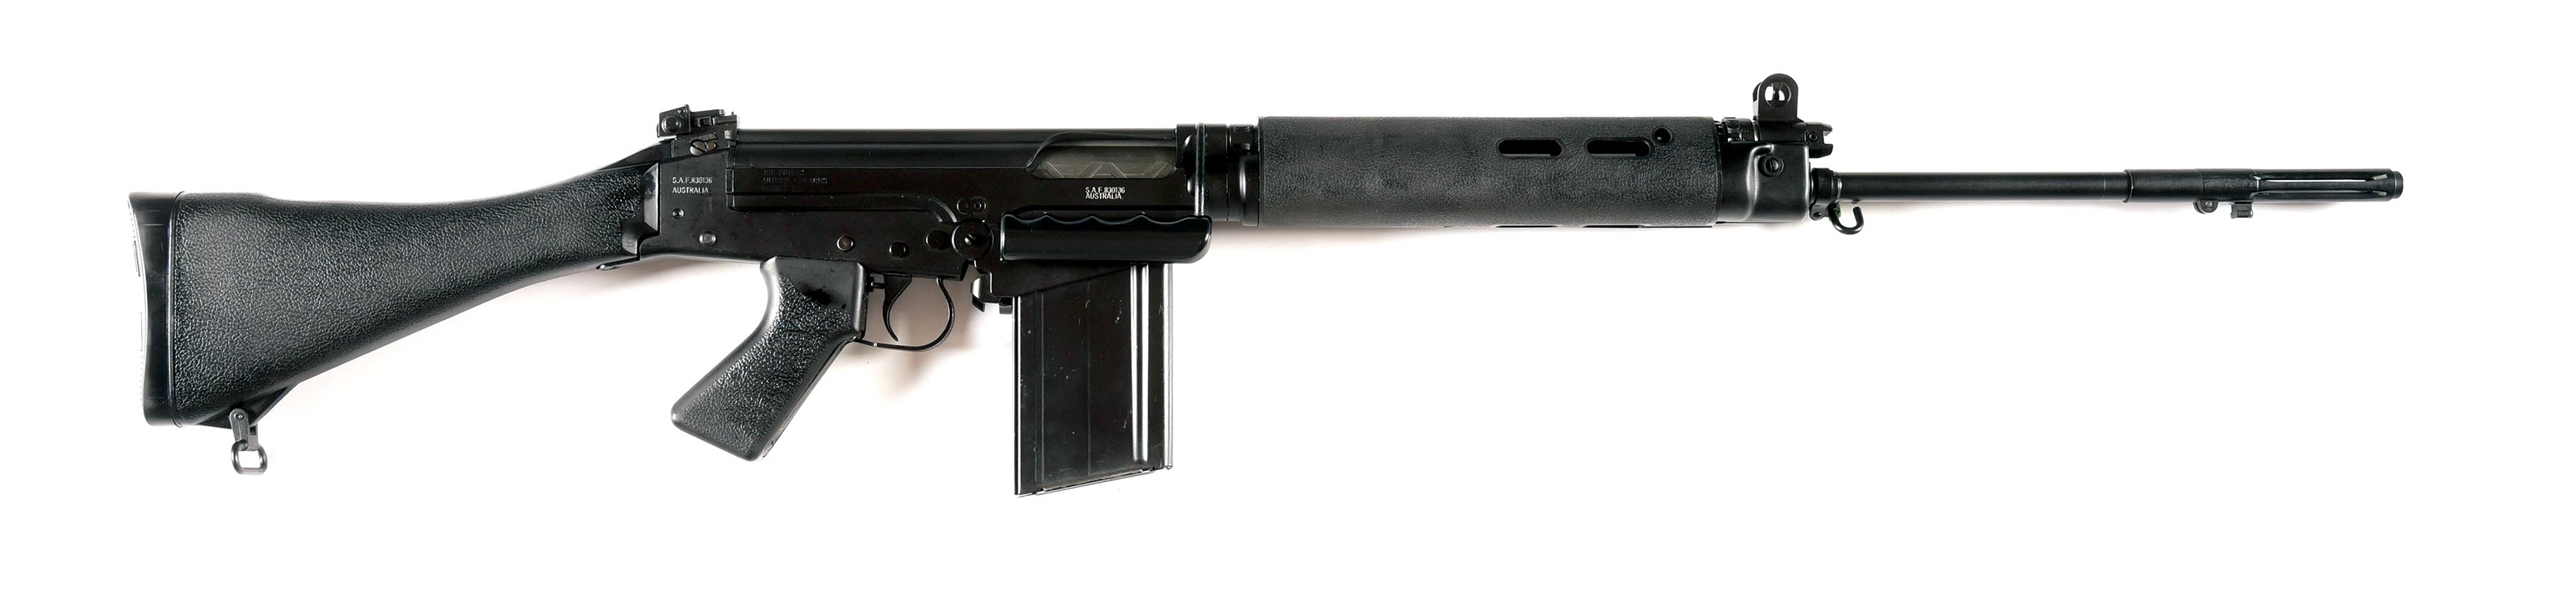 (M) EXTREMELY RARE HIGH CONDITION JOE POYER/LITHGOW AUSTRALIAN L1A1A SEMI-AUTOMATIC RIFLE.